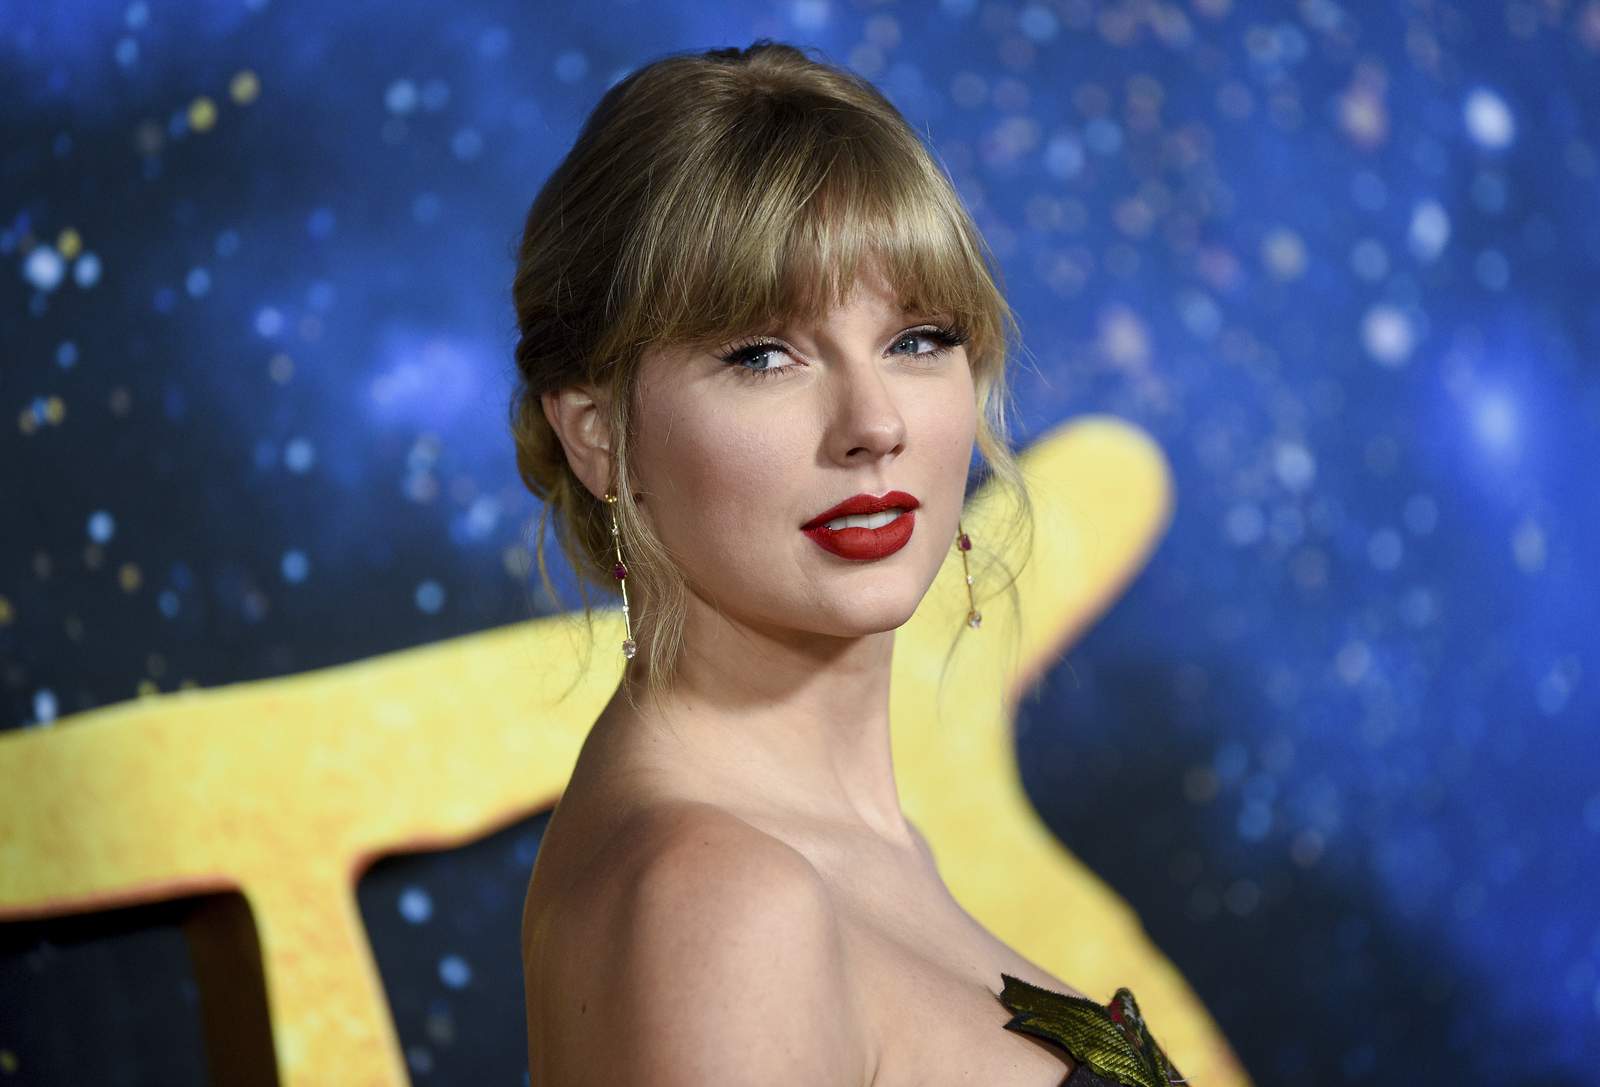 Taylor Swift 'folklore' concert film coming to Disney+